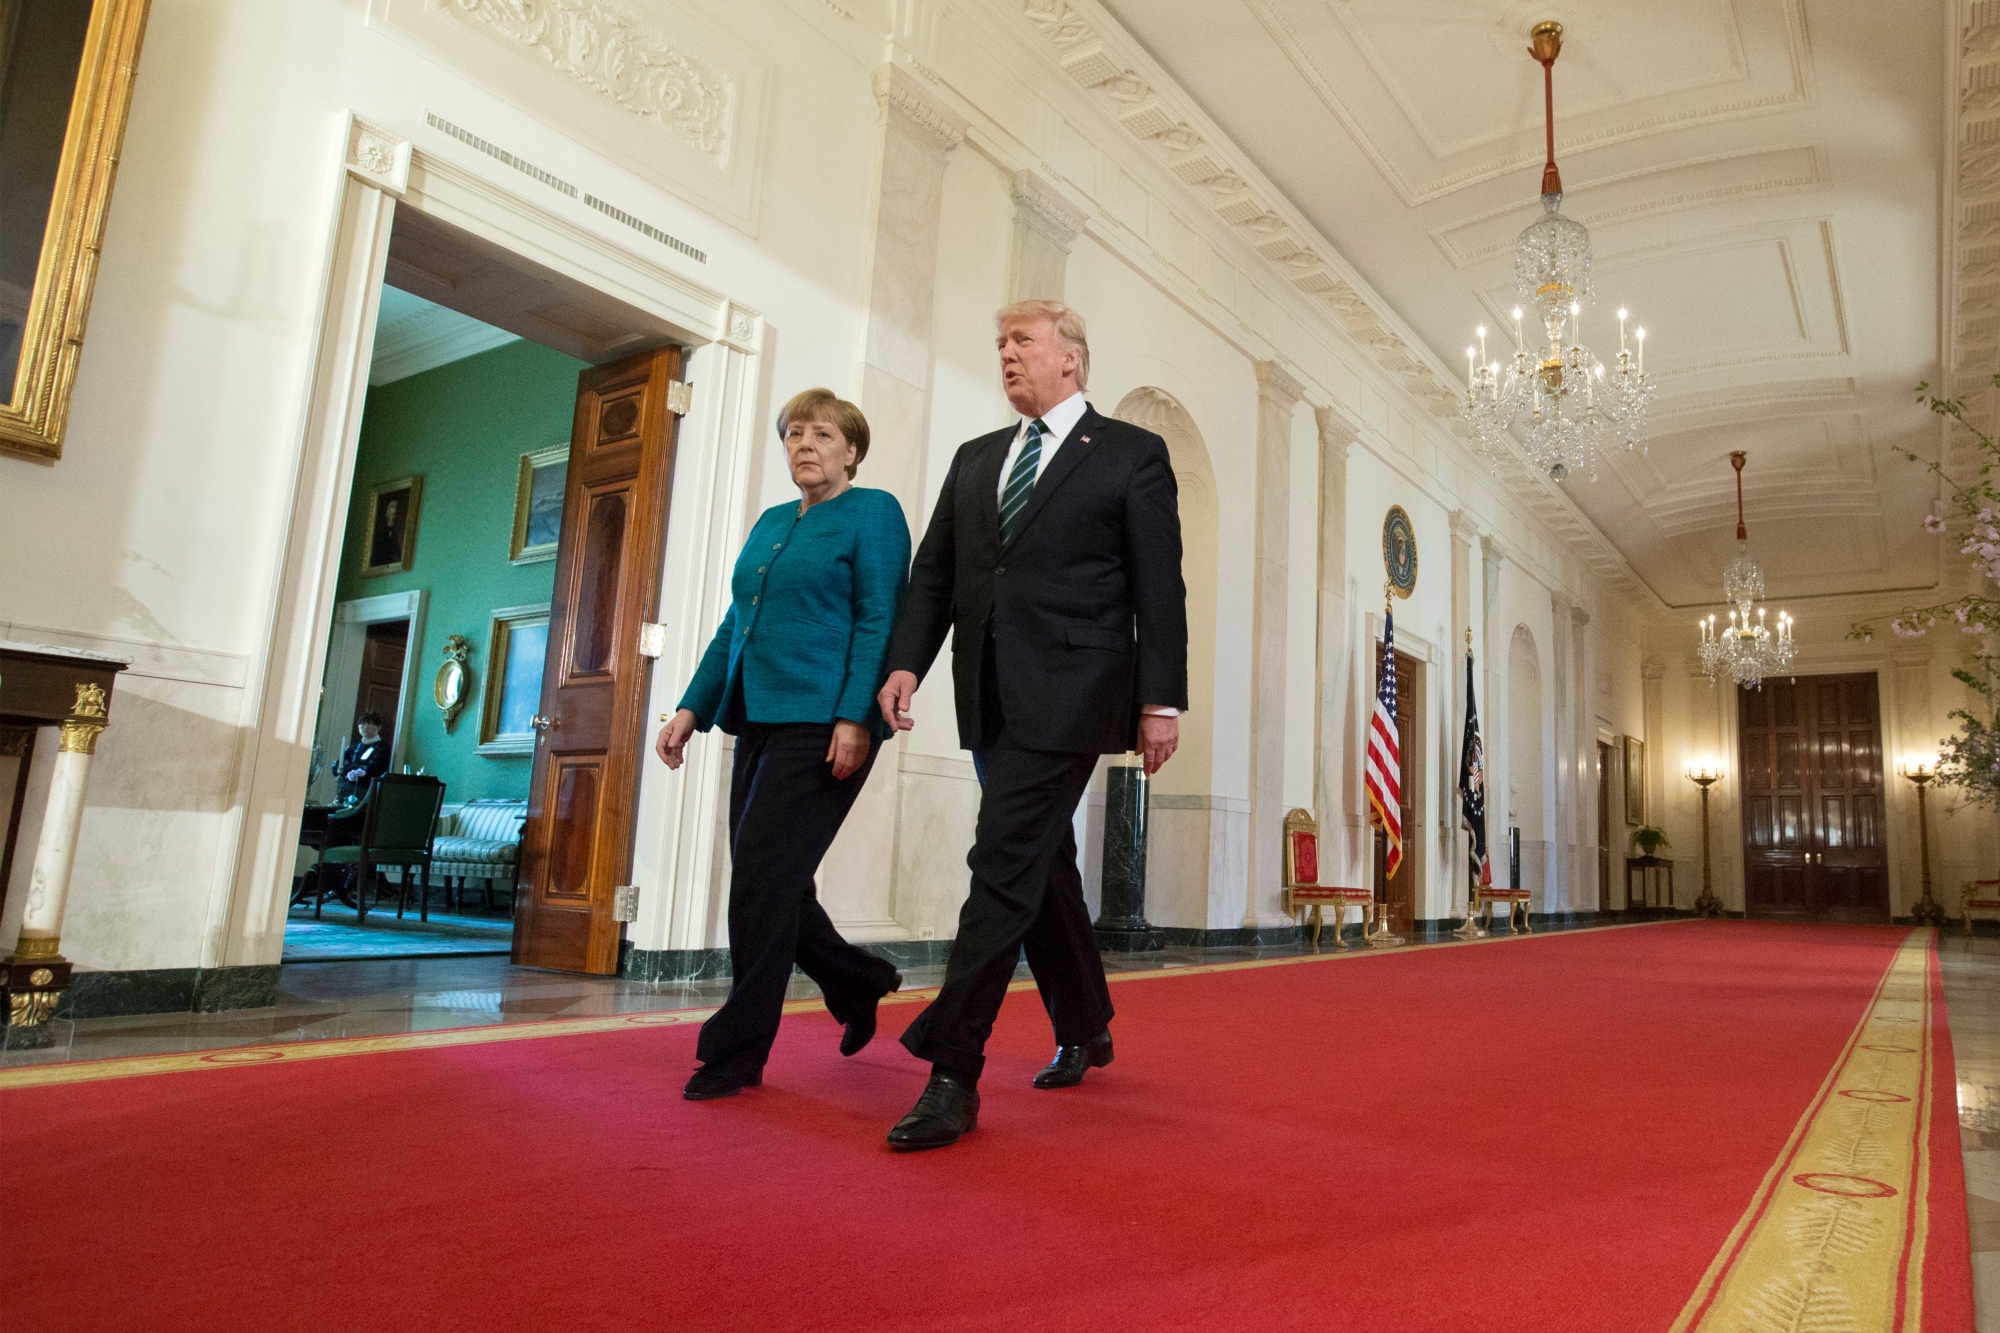 epa05854903 US President Donald J. Trump (R) and Chancellor of Germany Angela Merkel (L) walk down the Cross Hall to enter the East Room for a joint press conference in the East Room of the White House in Washington, DC, USA, 17 March 2017. Merkel and Trump meet at the White House for their first face-to-face meeting with an agenda of discussing transatlantic trade and security issues among two of the world's leading economies.  EPA/MICHAEL REYNOLDS USA GERMANY TRUMP MERKEL